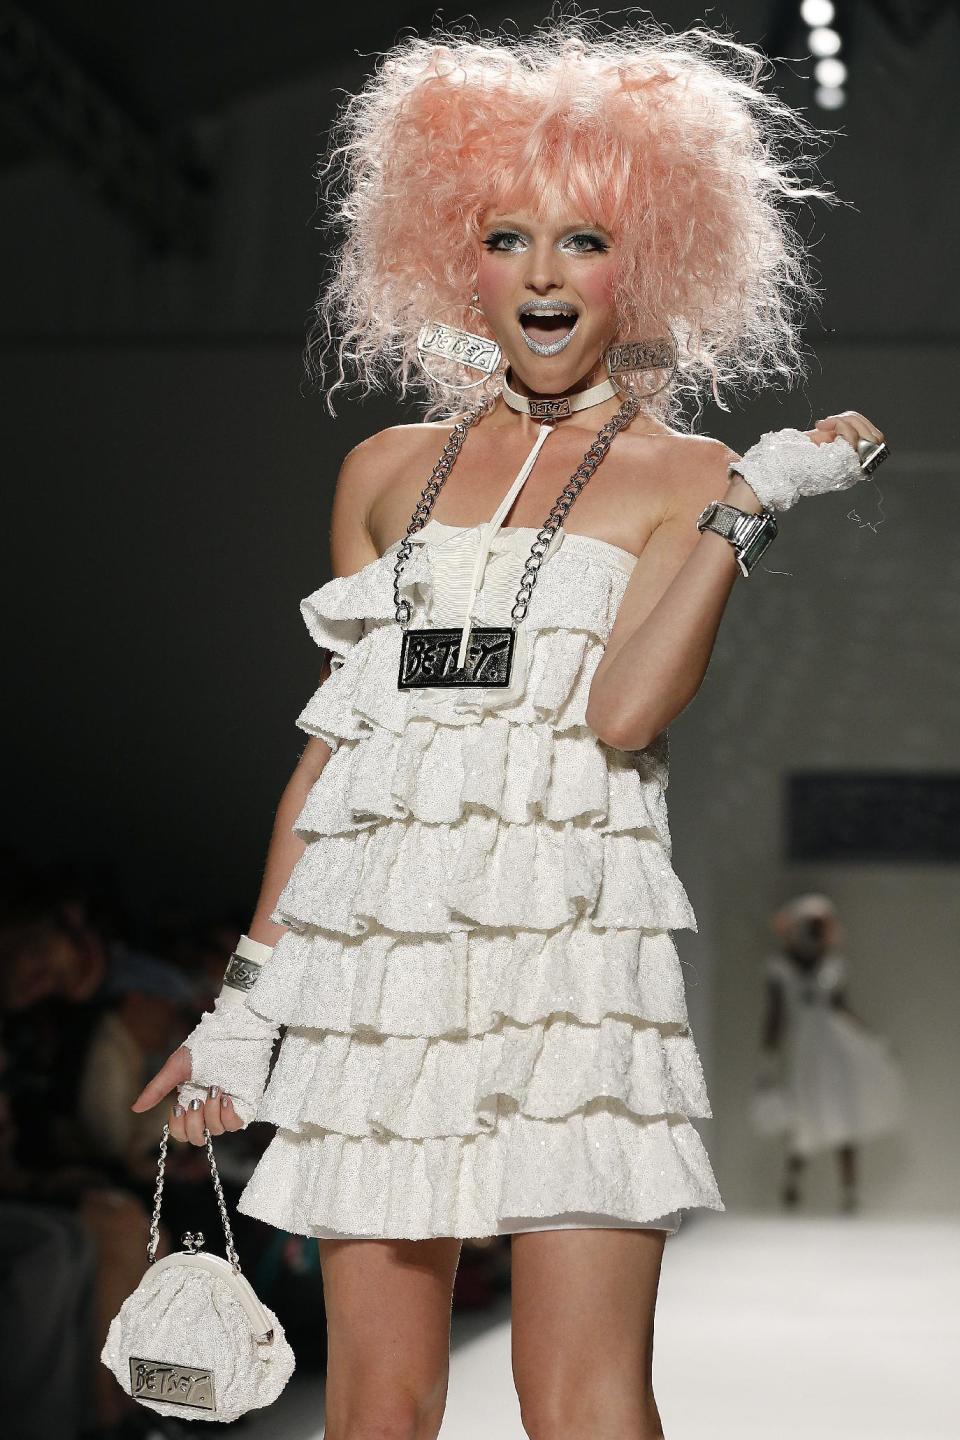 The Betsey Johnson Spring 2014 collection is modeled during Fashion Week in New York, Wednesday, Sept. 11, 2013. (AP Photo/John Minchillo)